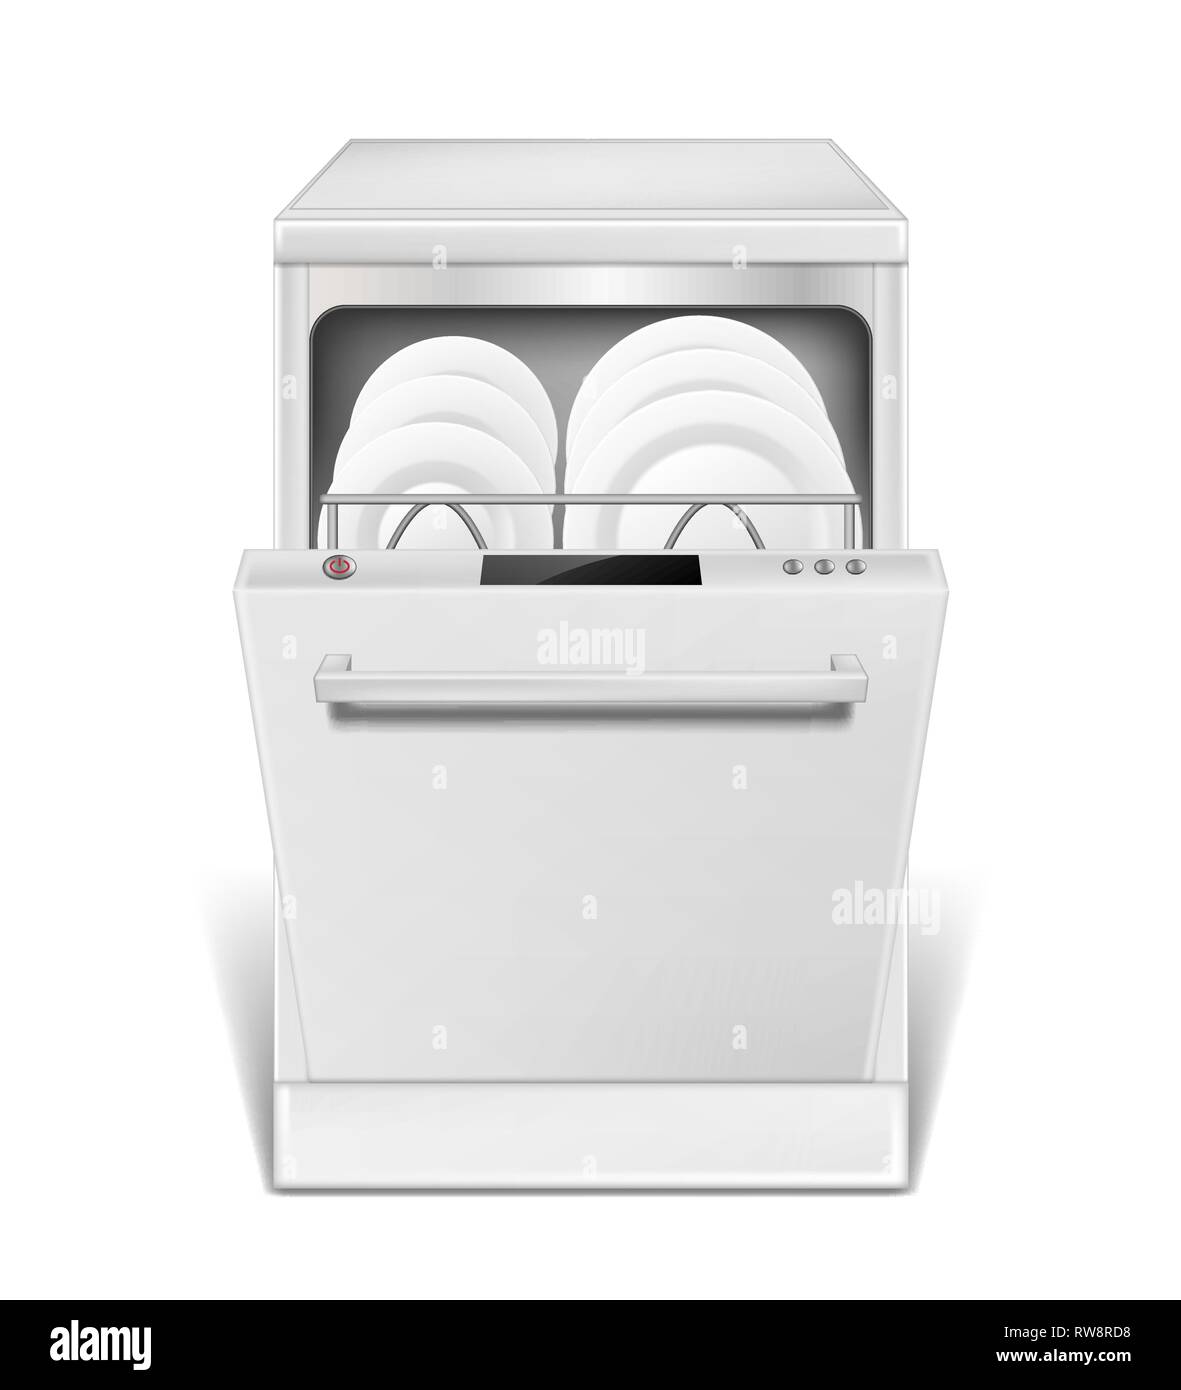 Realistic dishwasher machine with open door. White dishwasher with clean plates and glasses, front view isolated. household appliance mockup for Stock Vector